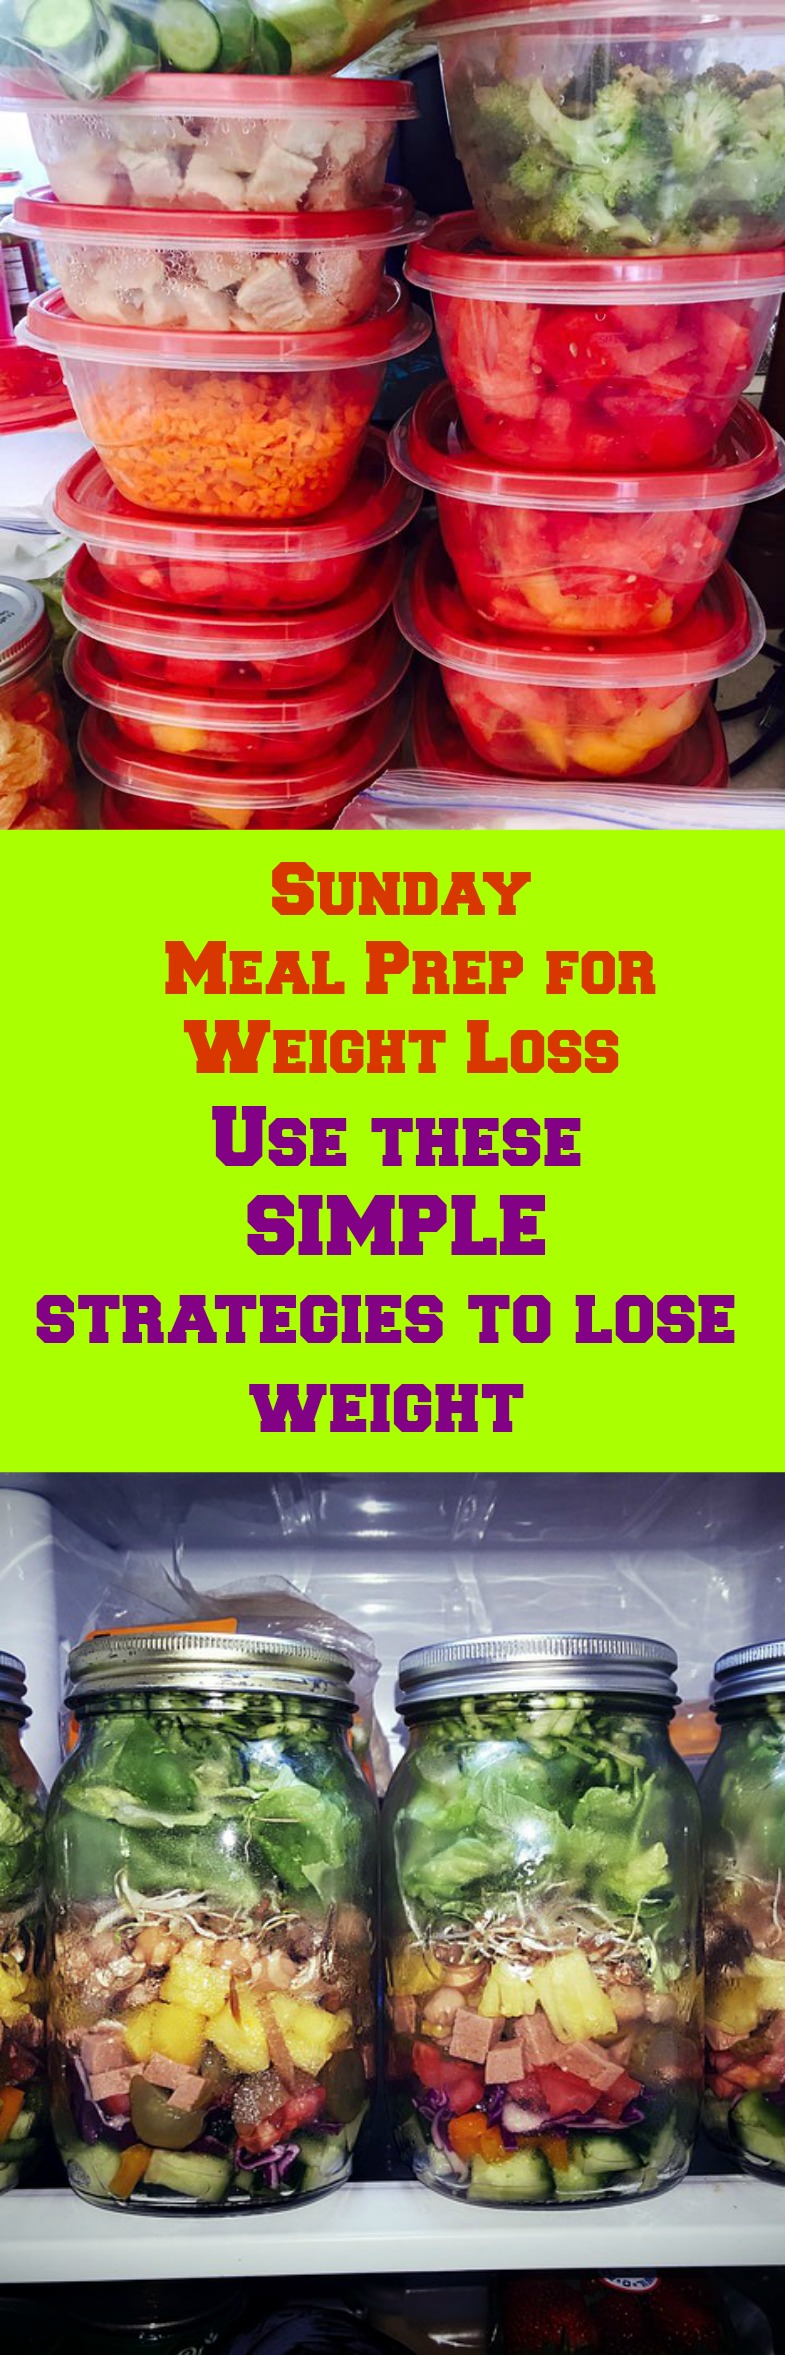 >Sunday Meal Prep for Weight Loss is your best task to achieve weight loss success! You must Use our strategies to be successful with your weight loss goals.